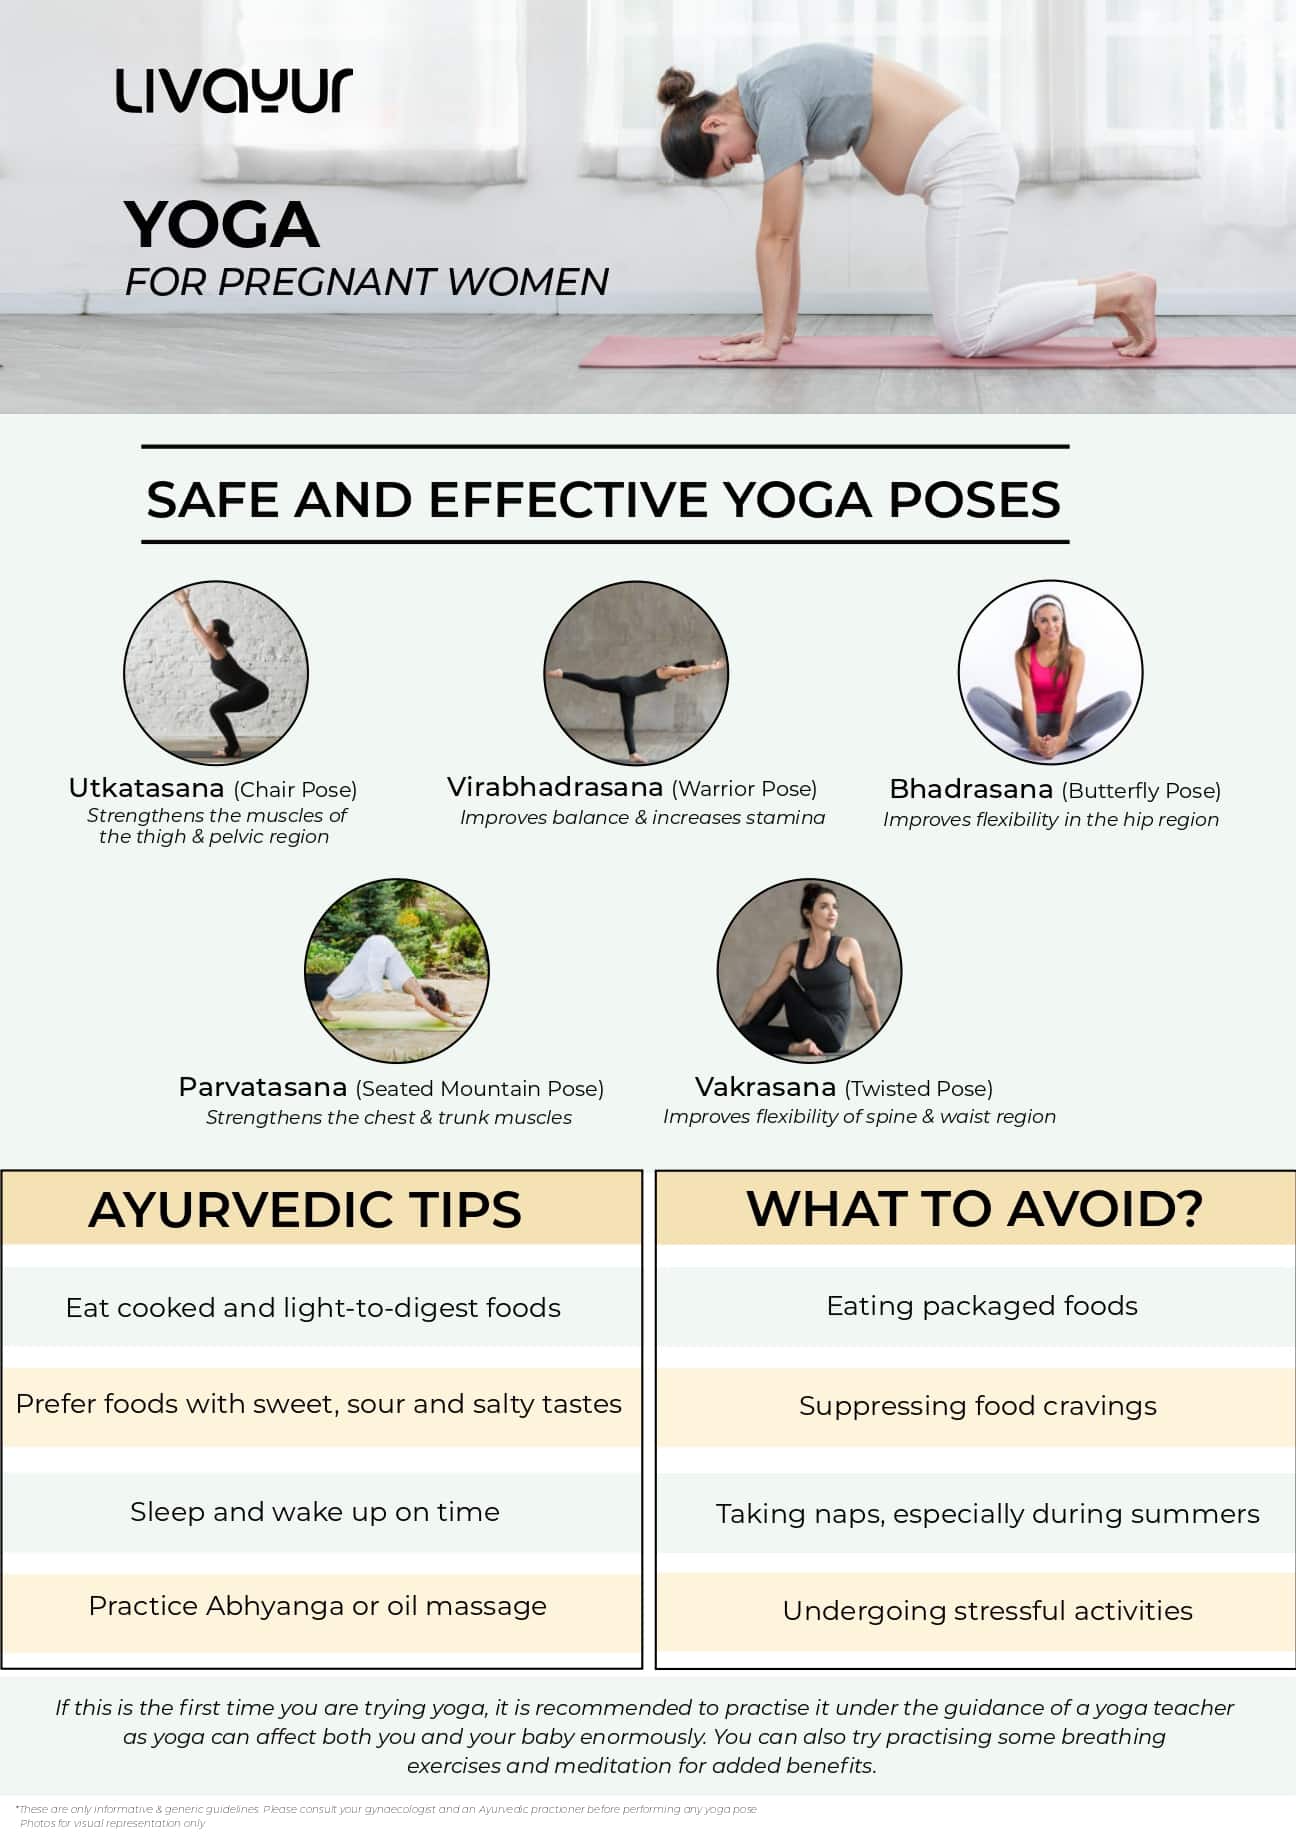 Best Yoga Poses For Pregnancy